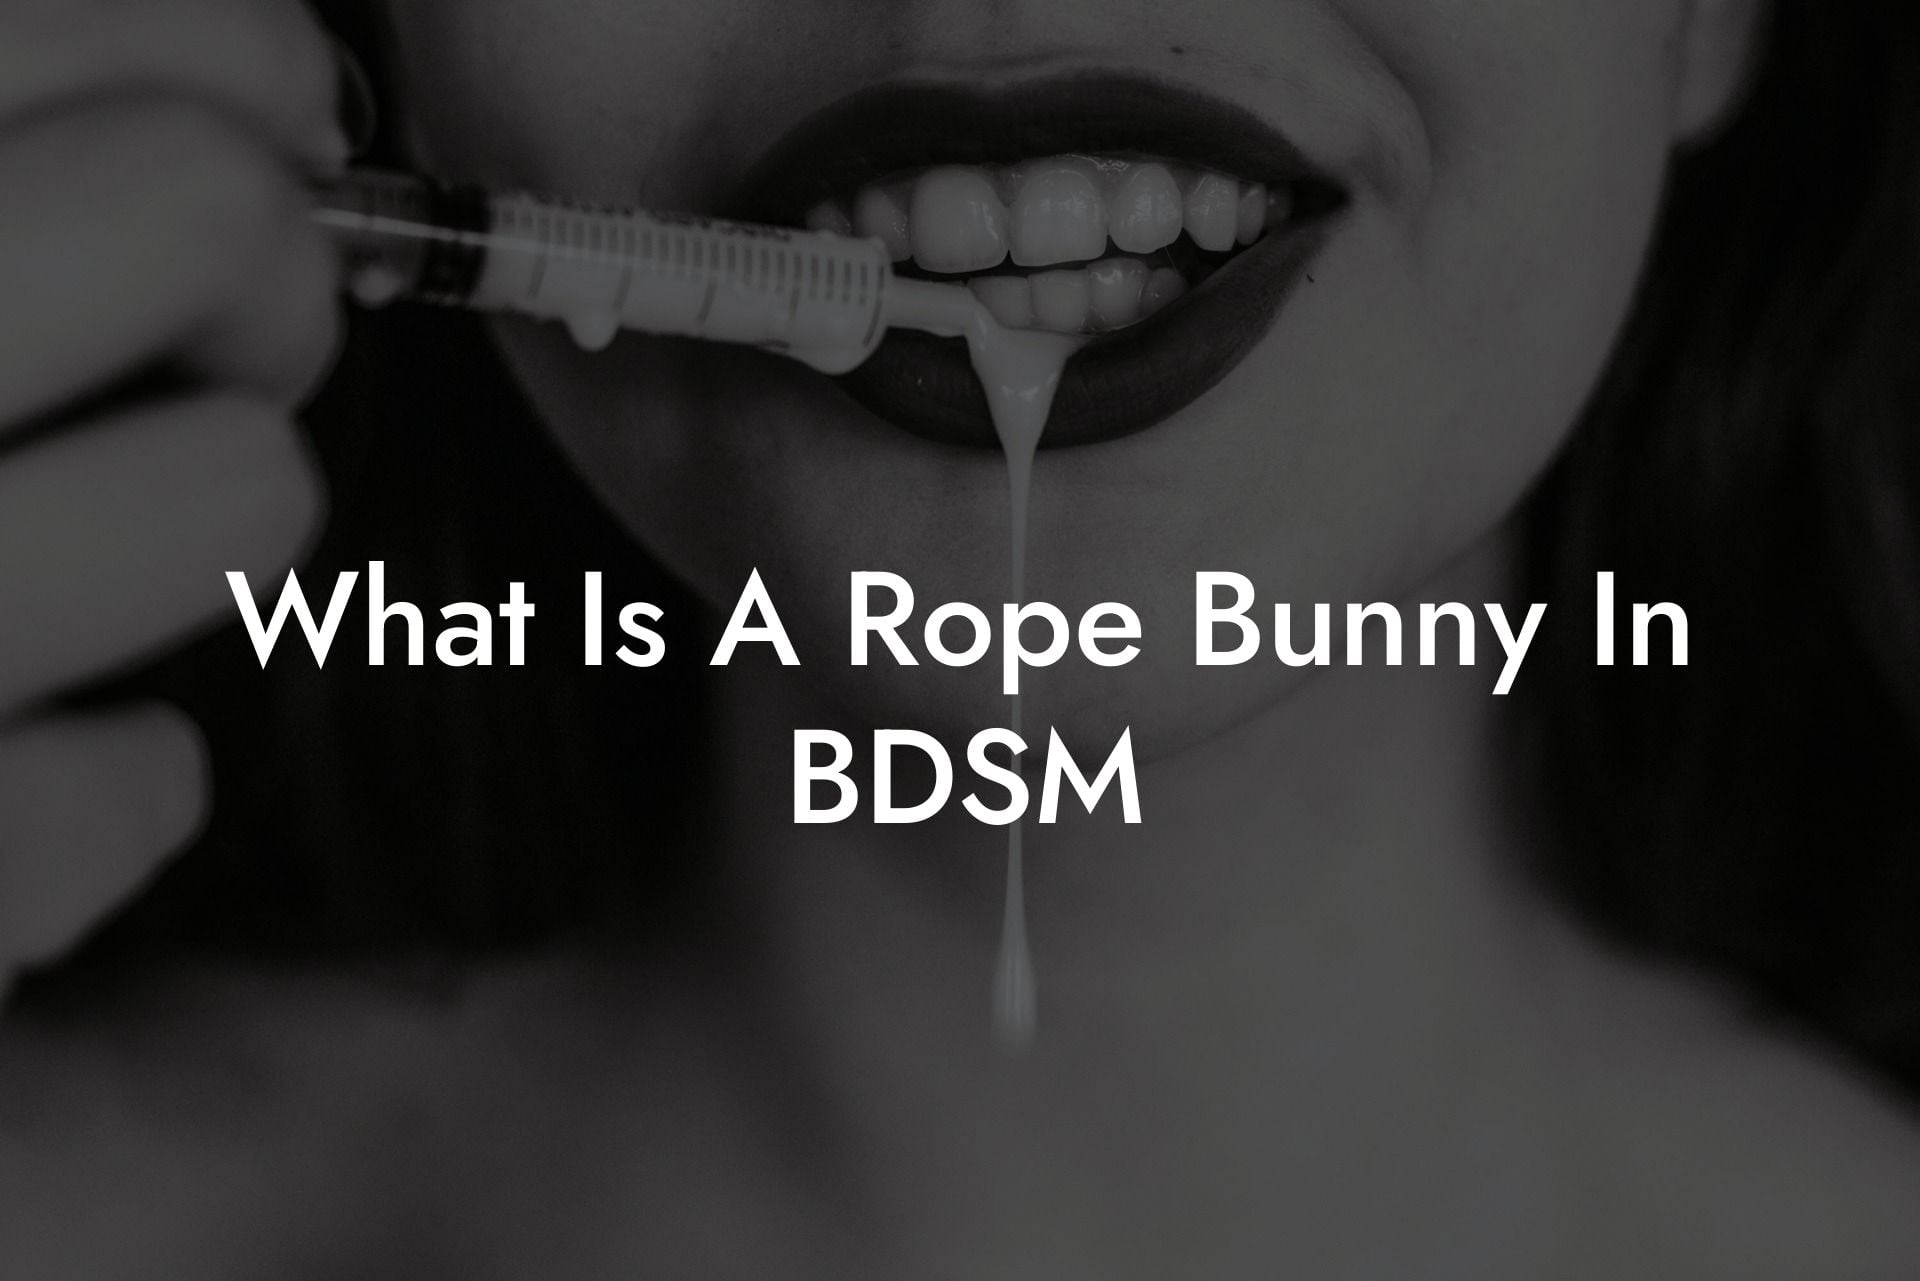 What Is A Rope Bunny In BDSM